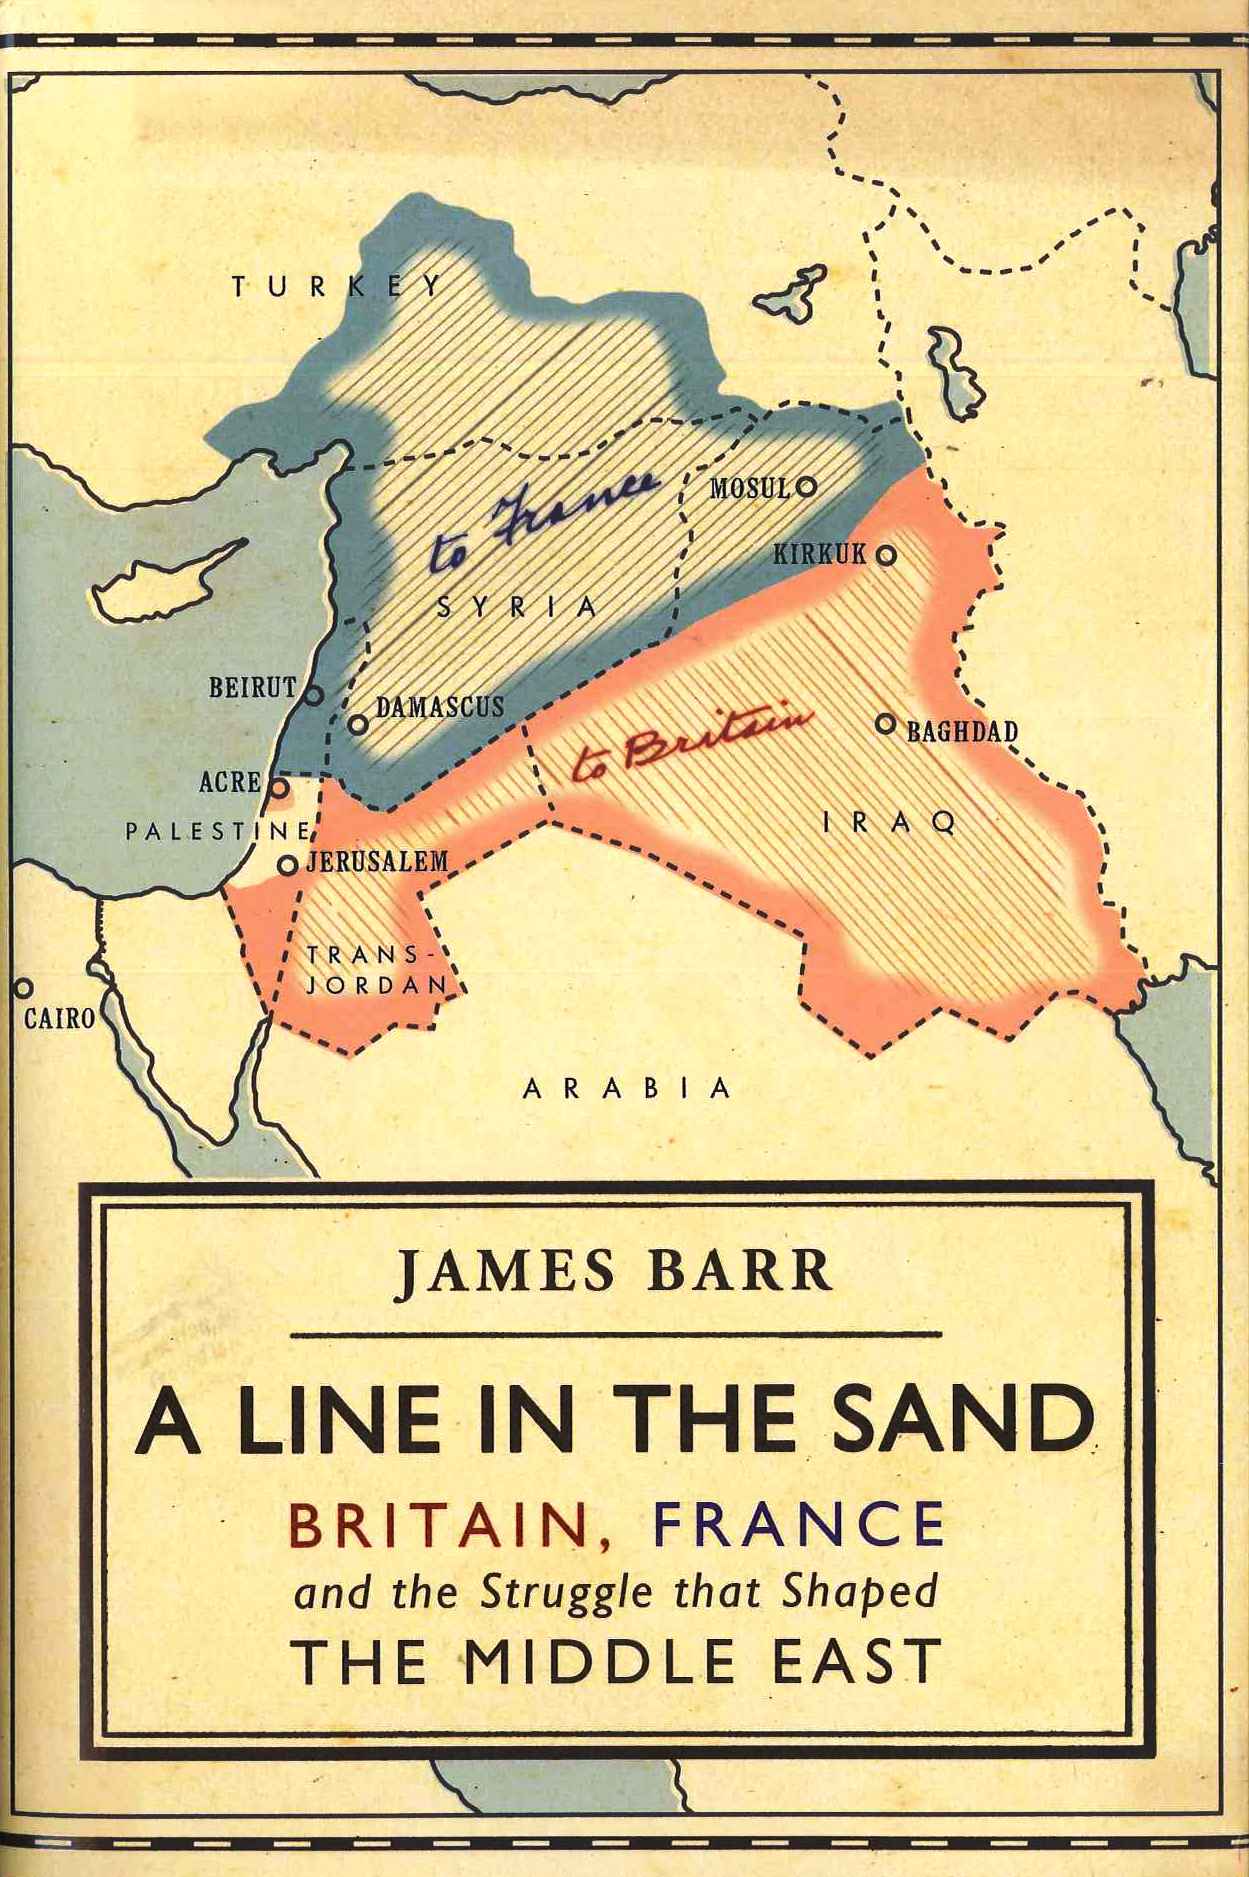 A line in the sand (cover image)